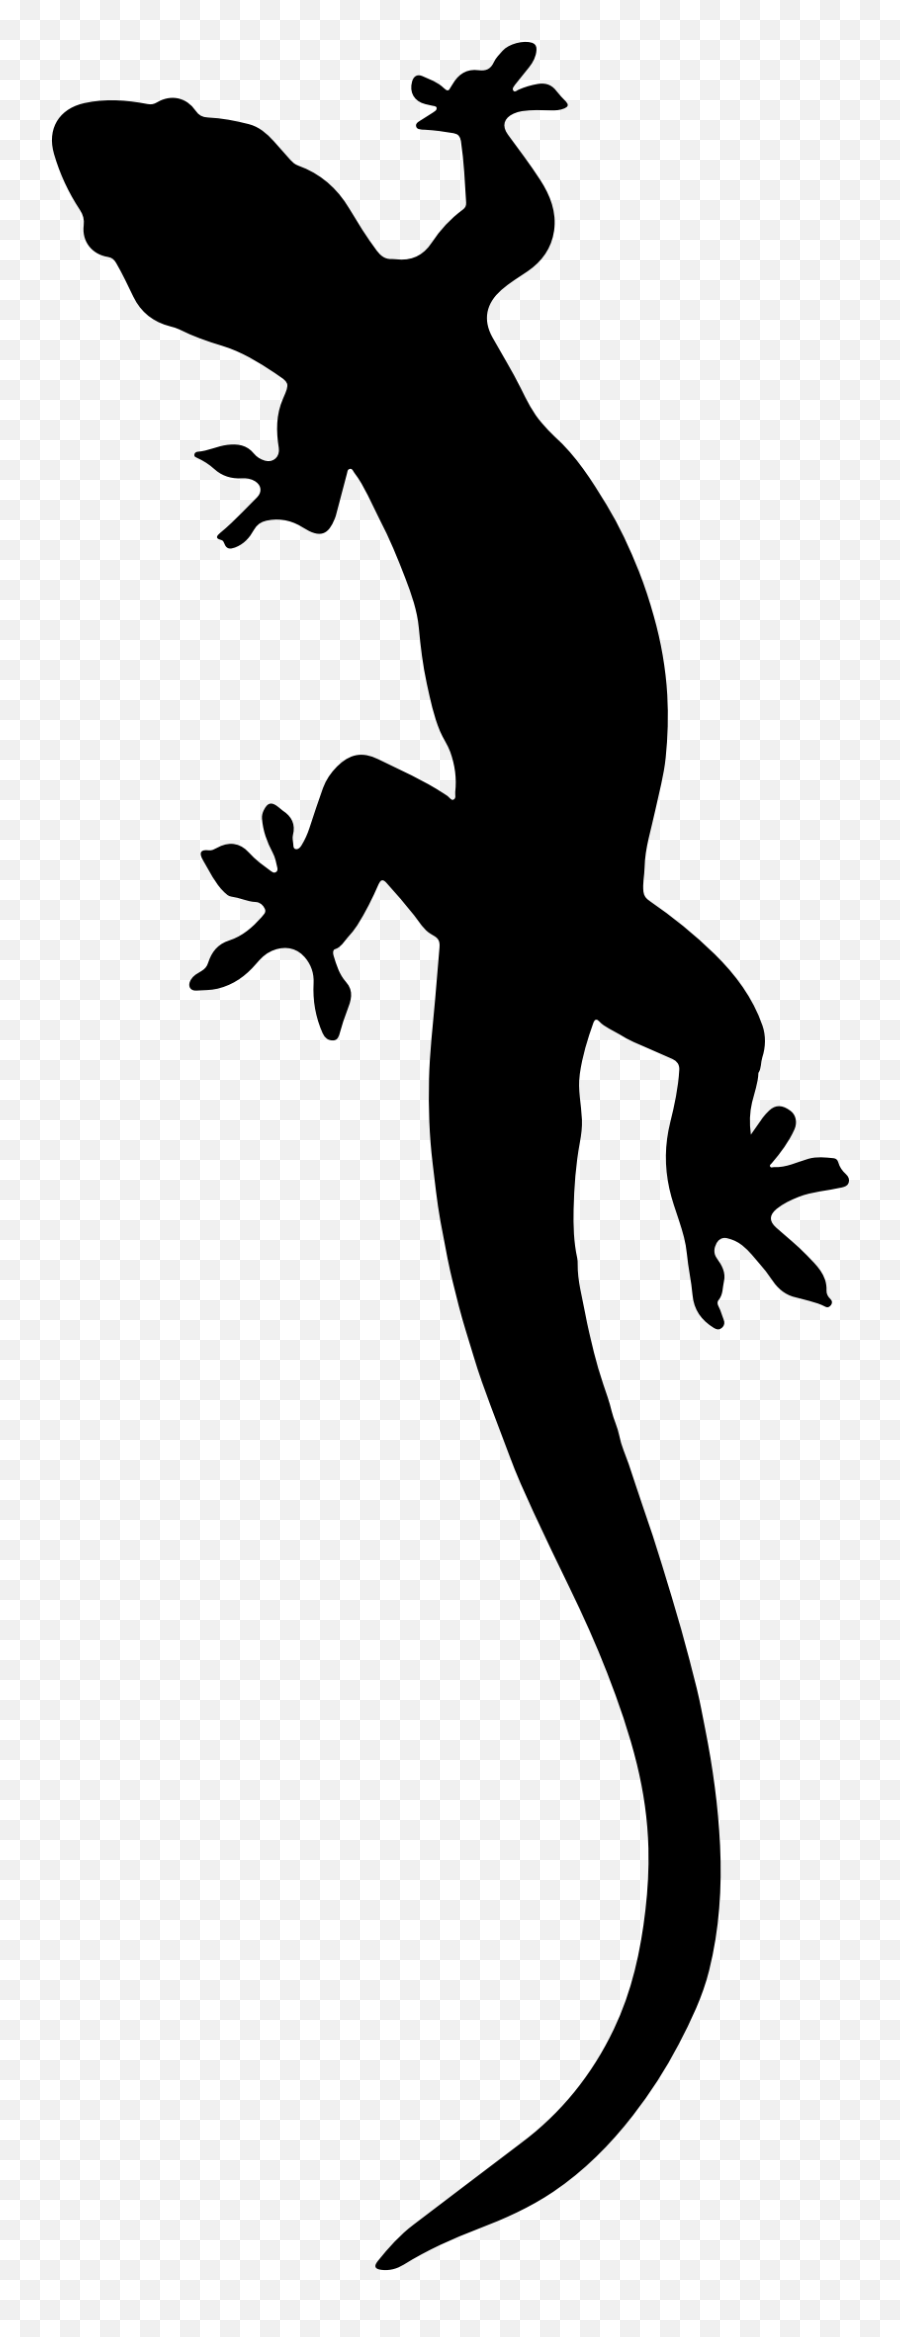 Silhouette Vector Clipart Image - Transparent Background Gecko Clipart Emoji,Two Fingers Emoji